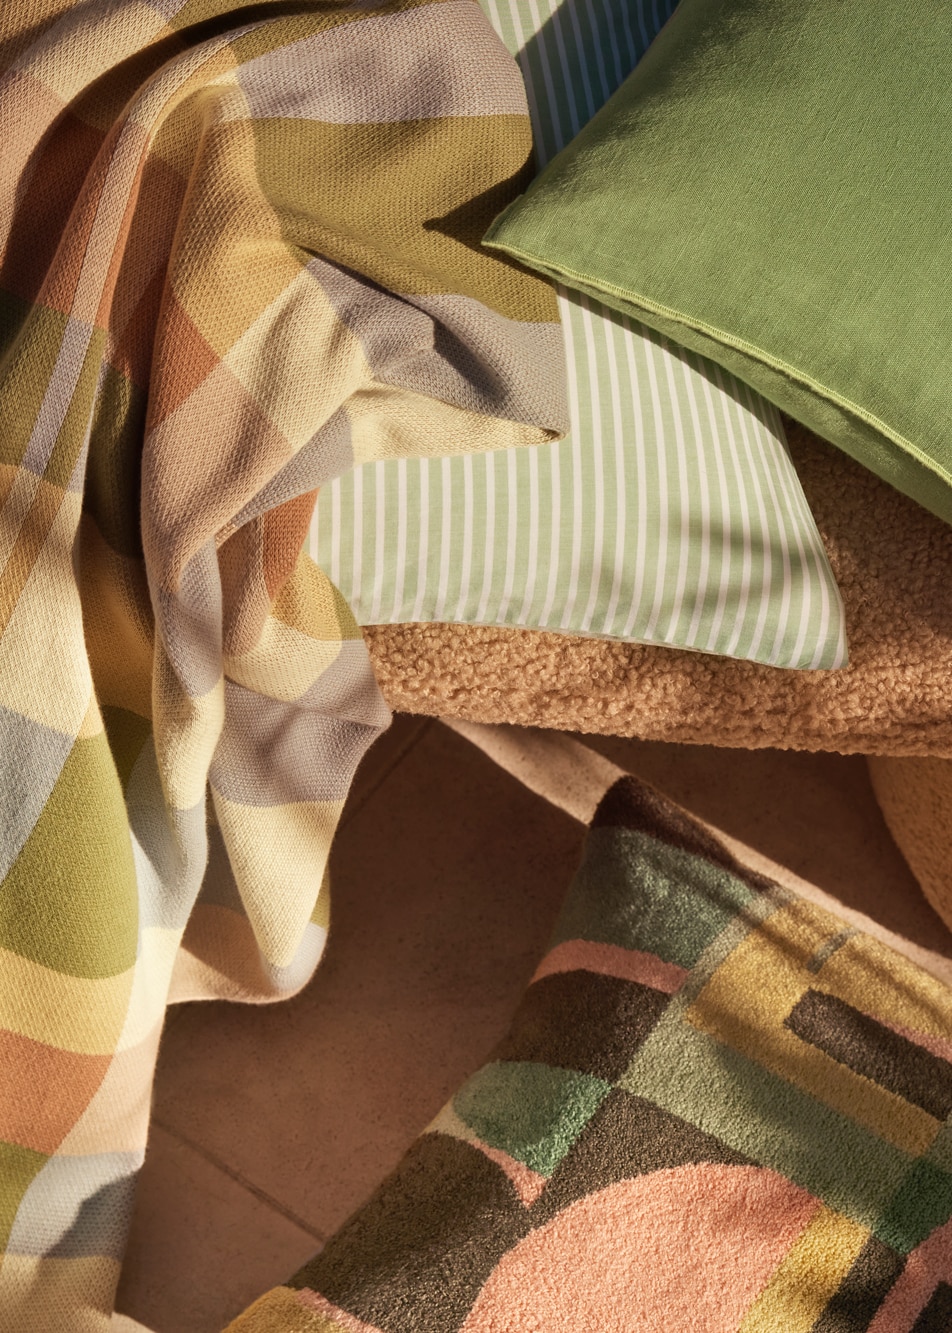 A close-up image of a patterned throw and several cushions scattered around a chair